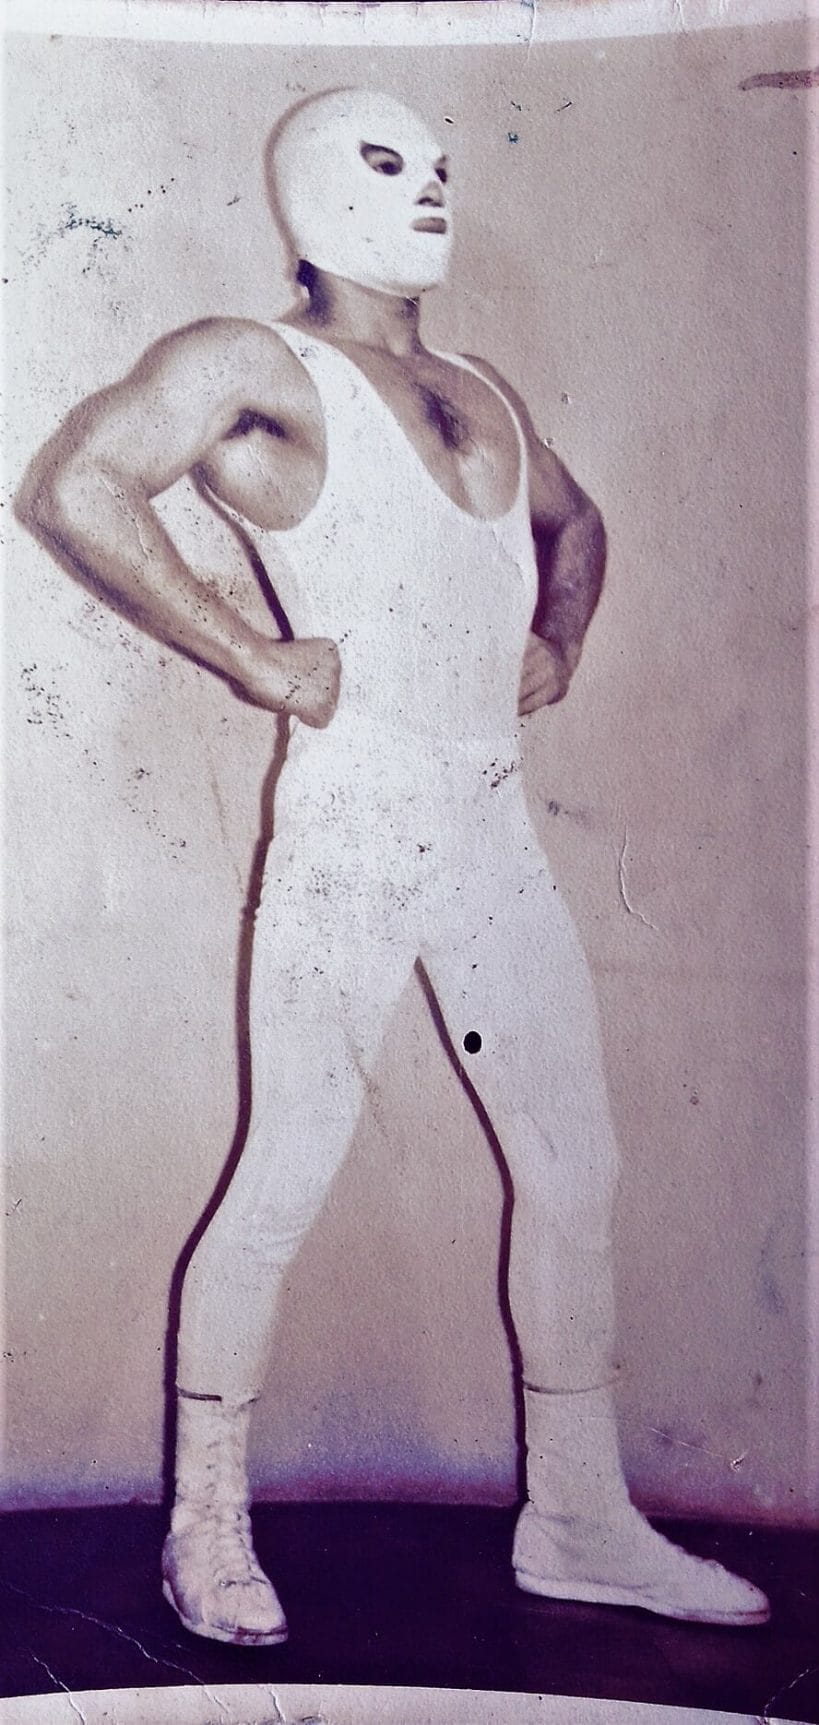 Throughout most of his career, The Rayman worked without a mask, but he sported one like his idol and trainer The Tempest from Mexico for a brief period.